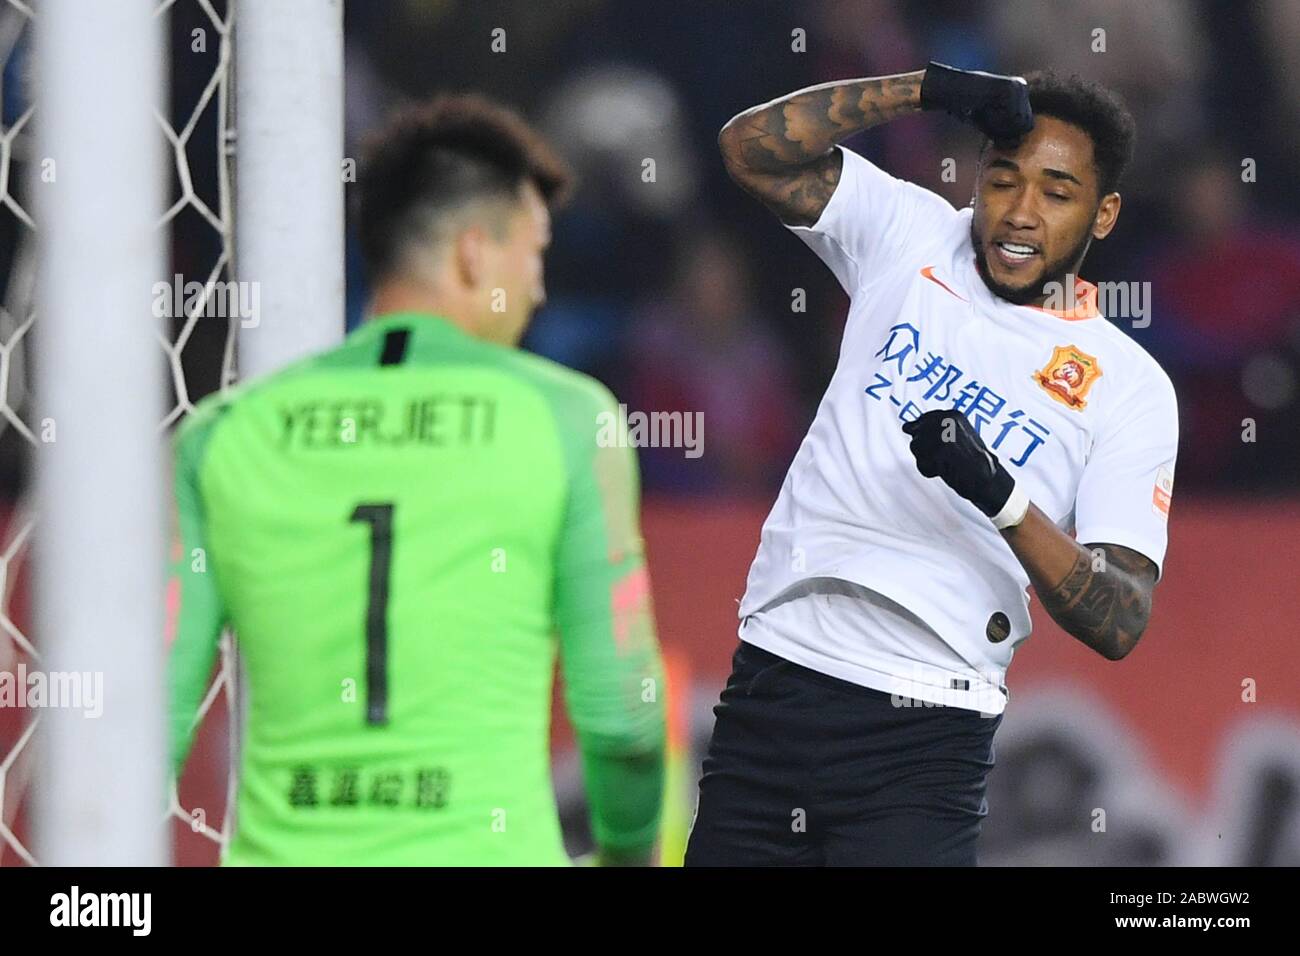 Brazilian football player Rafael Pereira da Silva, commonly known as Rafael or Rafael da Silva, of Wuhan Zall F.C., right, celebrates after scoring a goal during the 29th round match of Chinese Football Association Super League (CSL) against Chongqing SWM in Chongqing, China, 27 November 2019. Chongqing SWM was defeated by Wuhan Zall with 0-1. Stock Photo